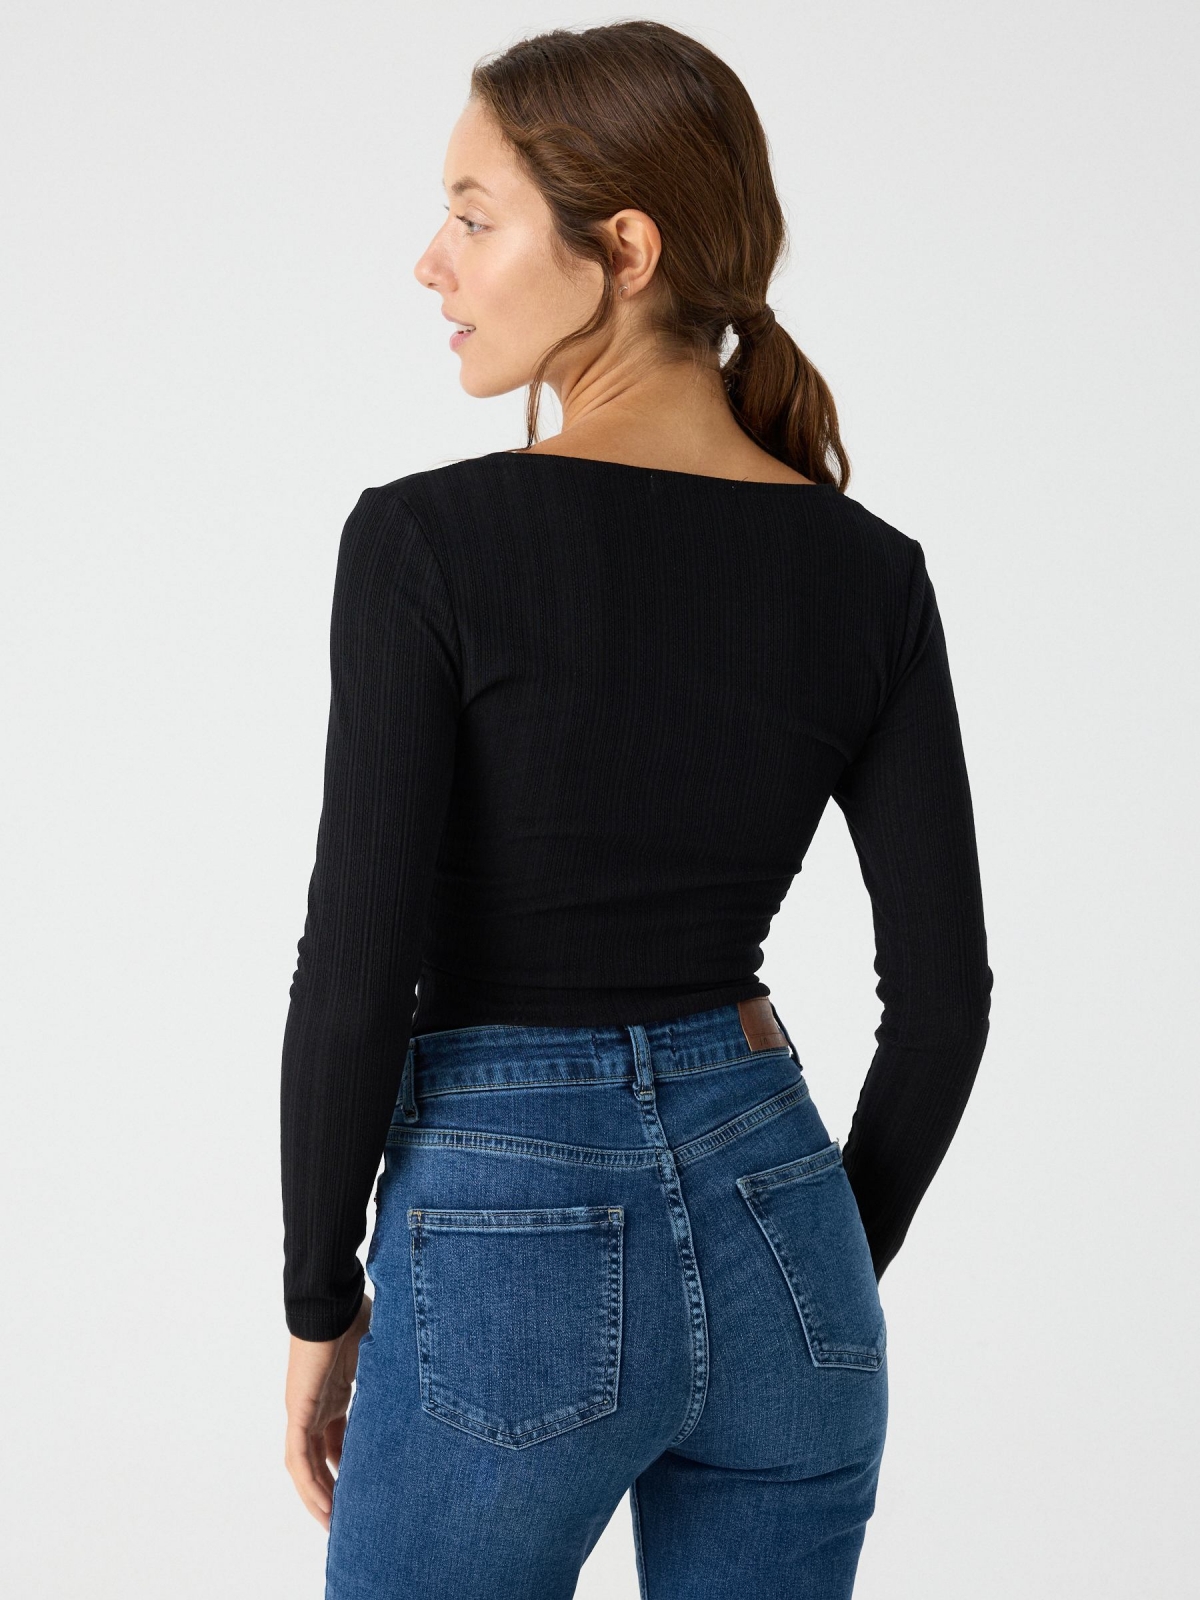 Ribbed t-shirt with crossed neckline black middle back view